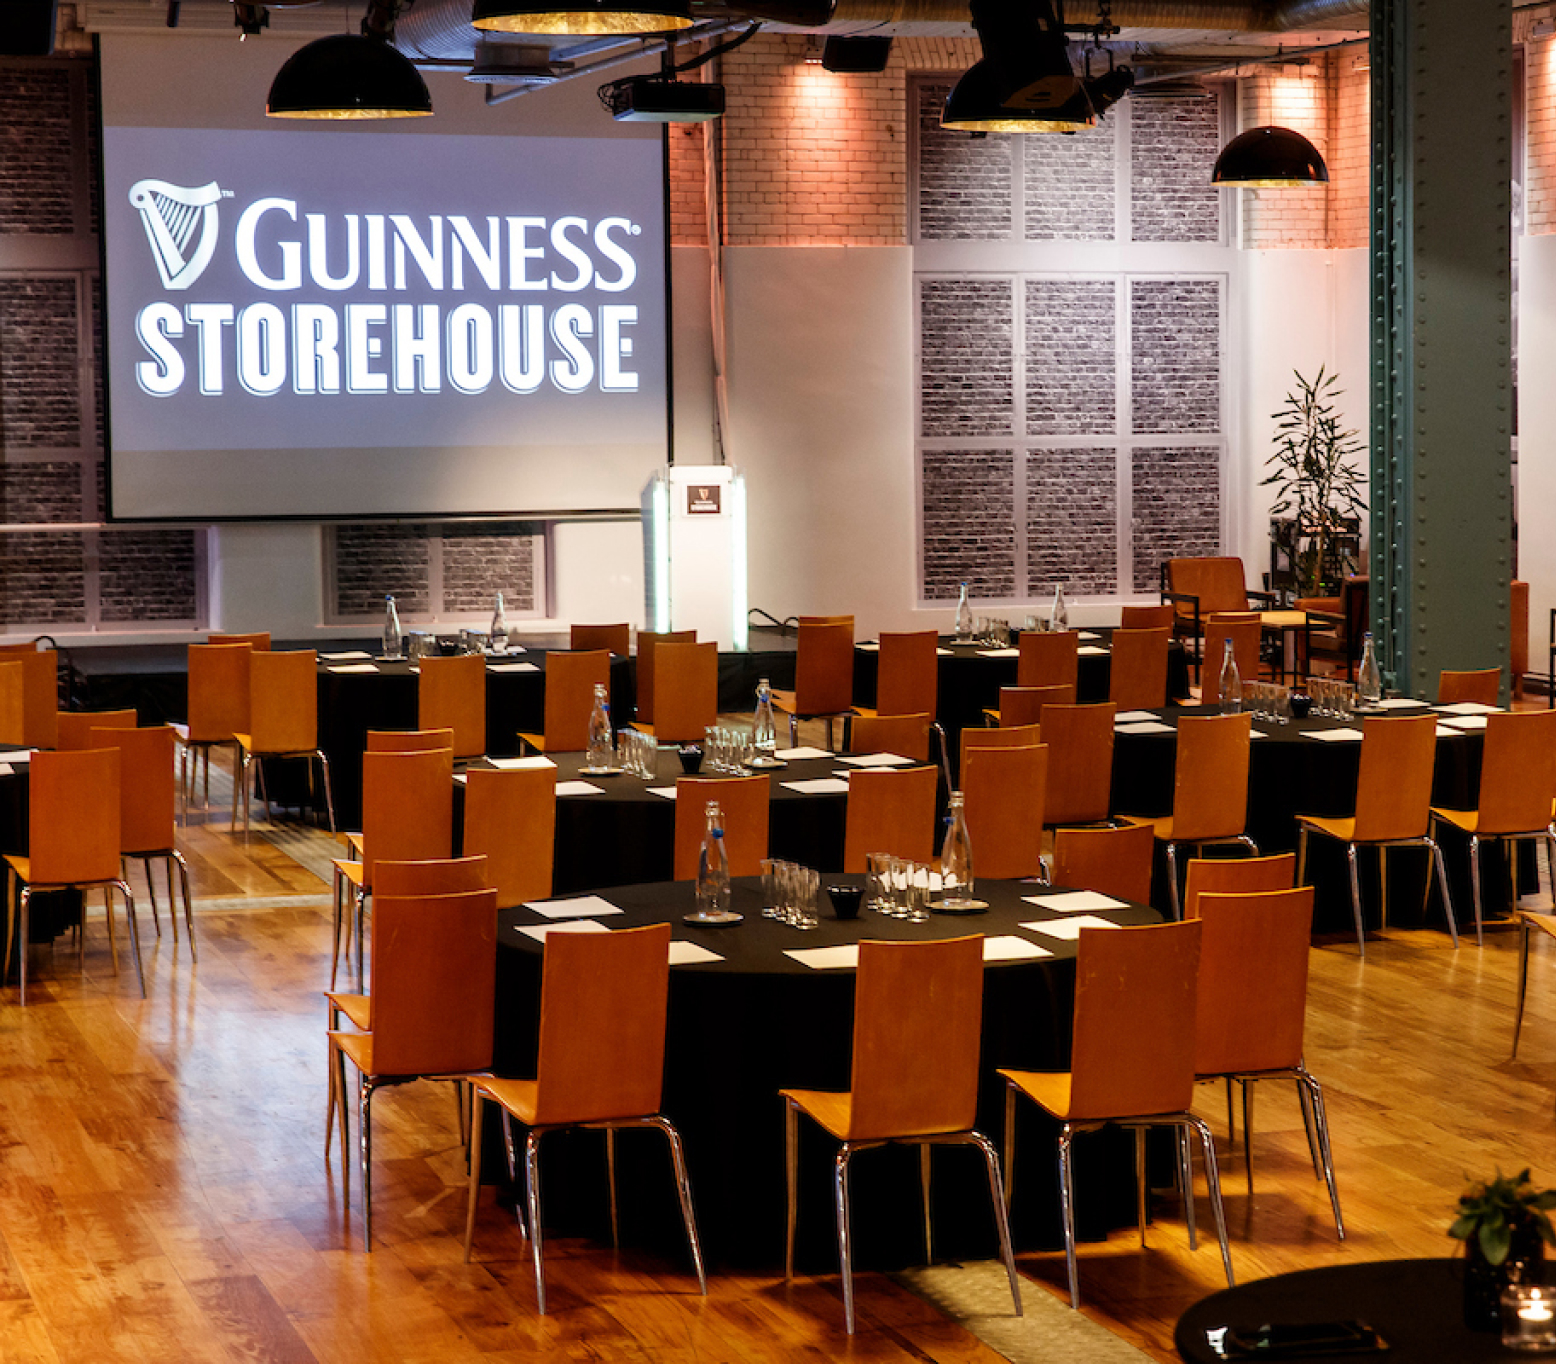 Arrol Suite set up for conference at the Guinness Storehouse